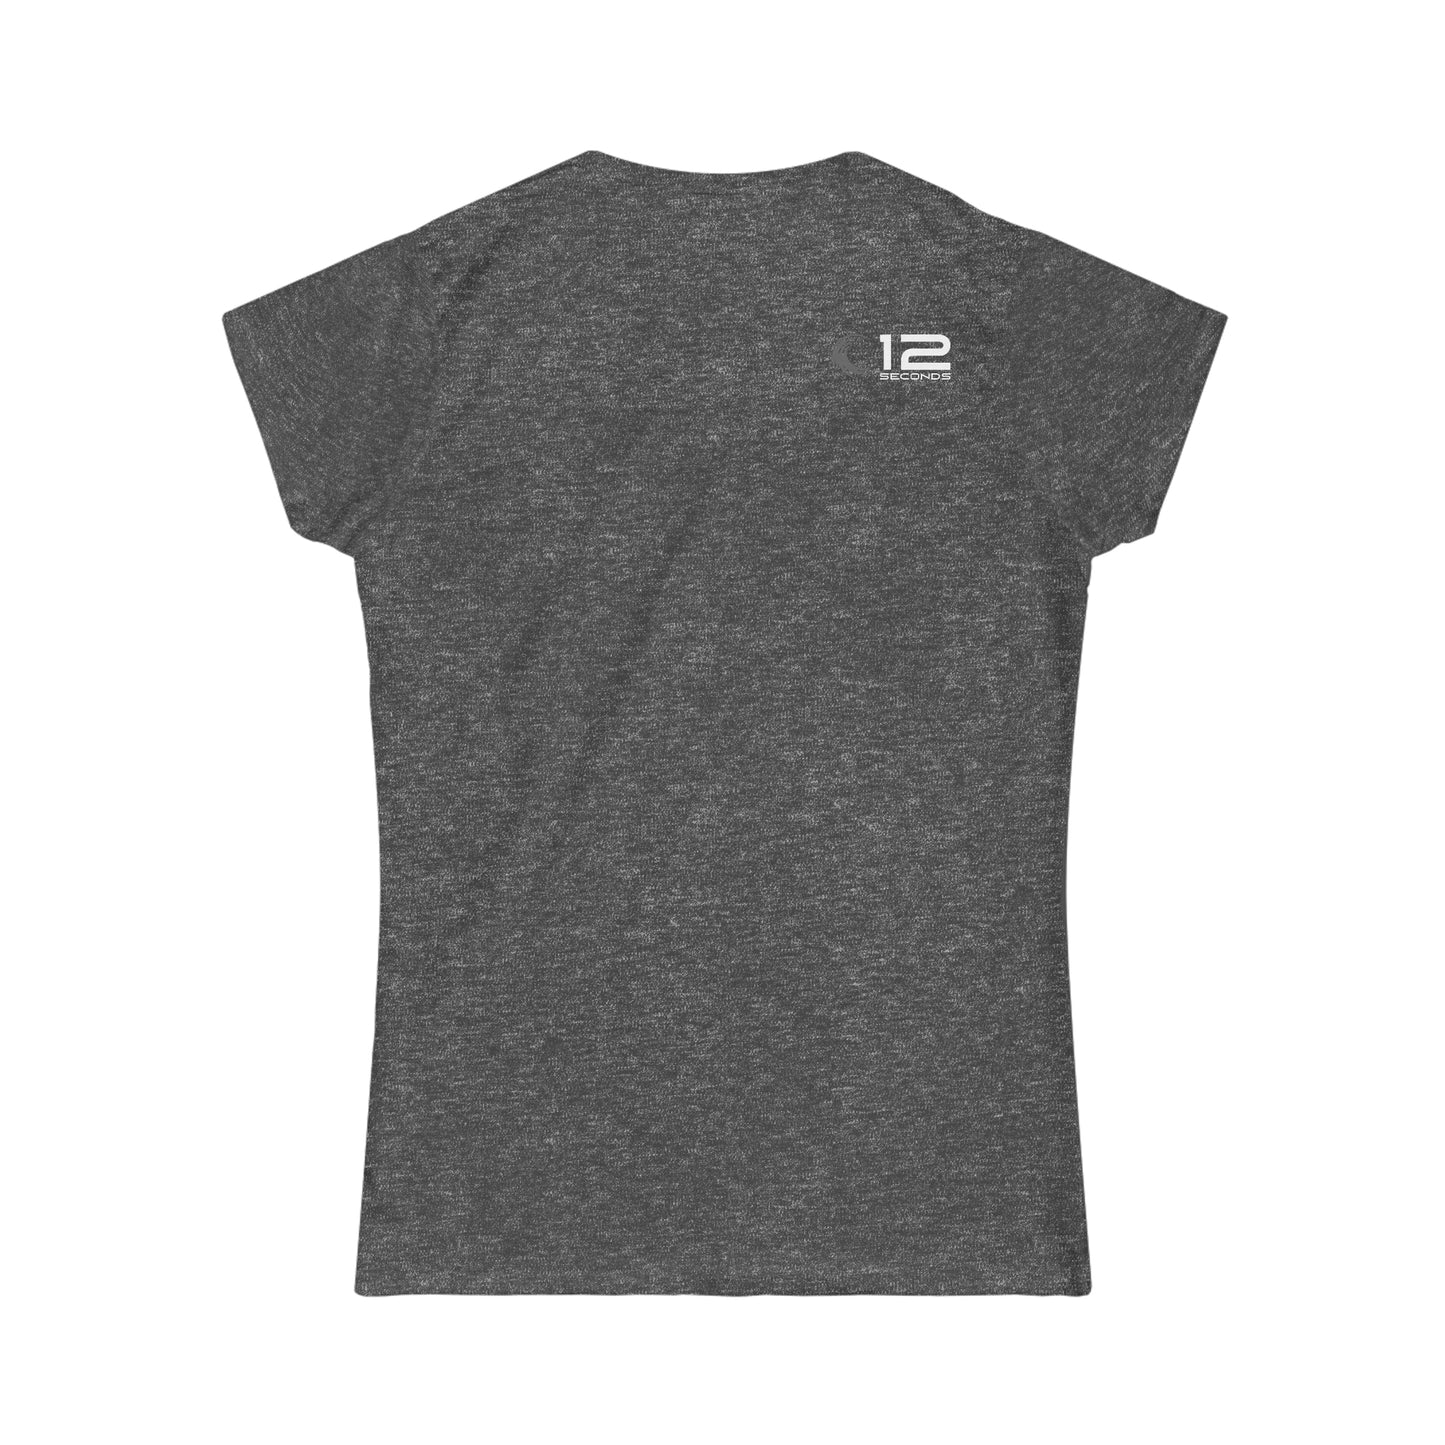 Women's Softstyle Tee - CHEETAH - 12 SECONDS APPAREL